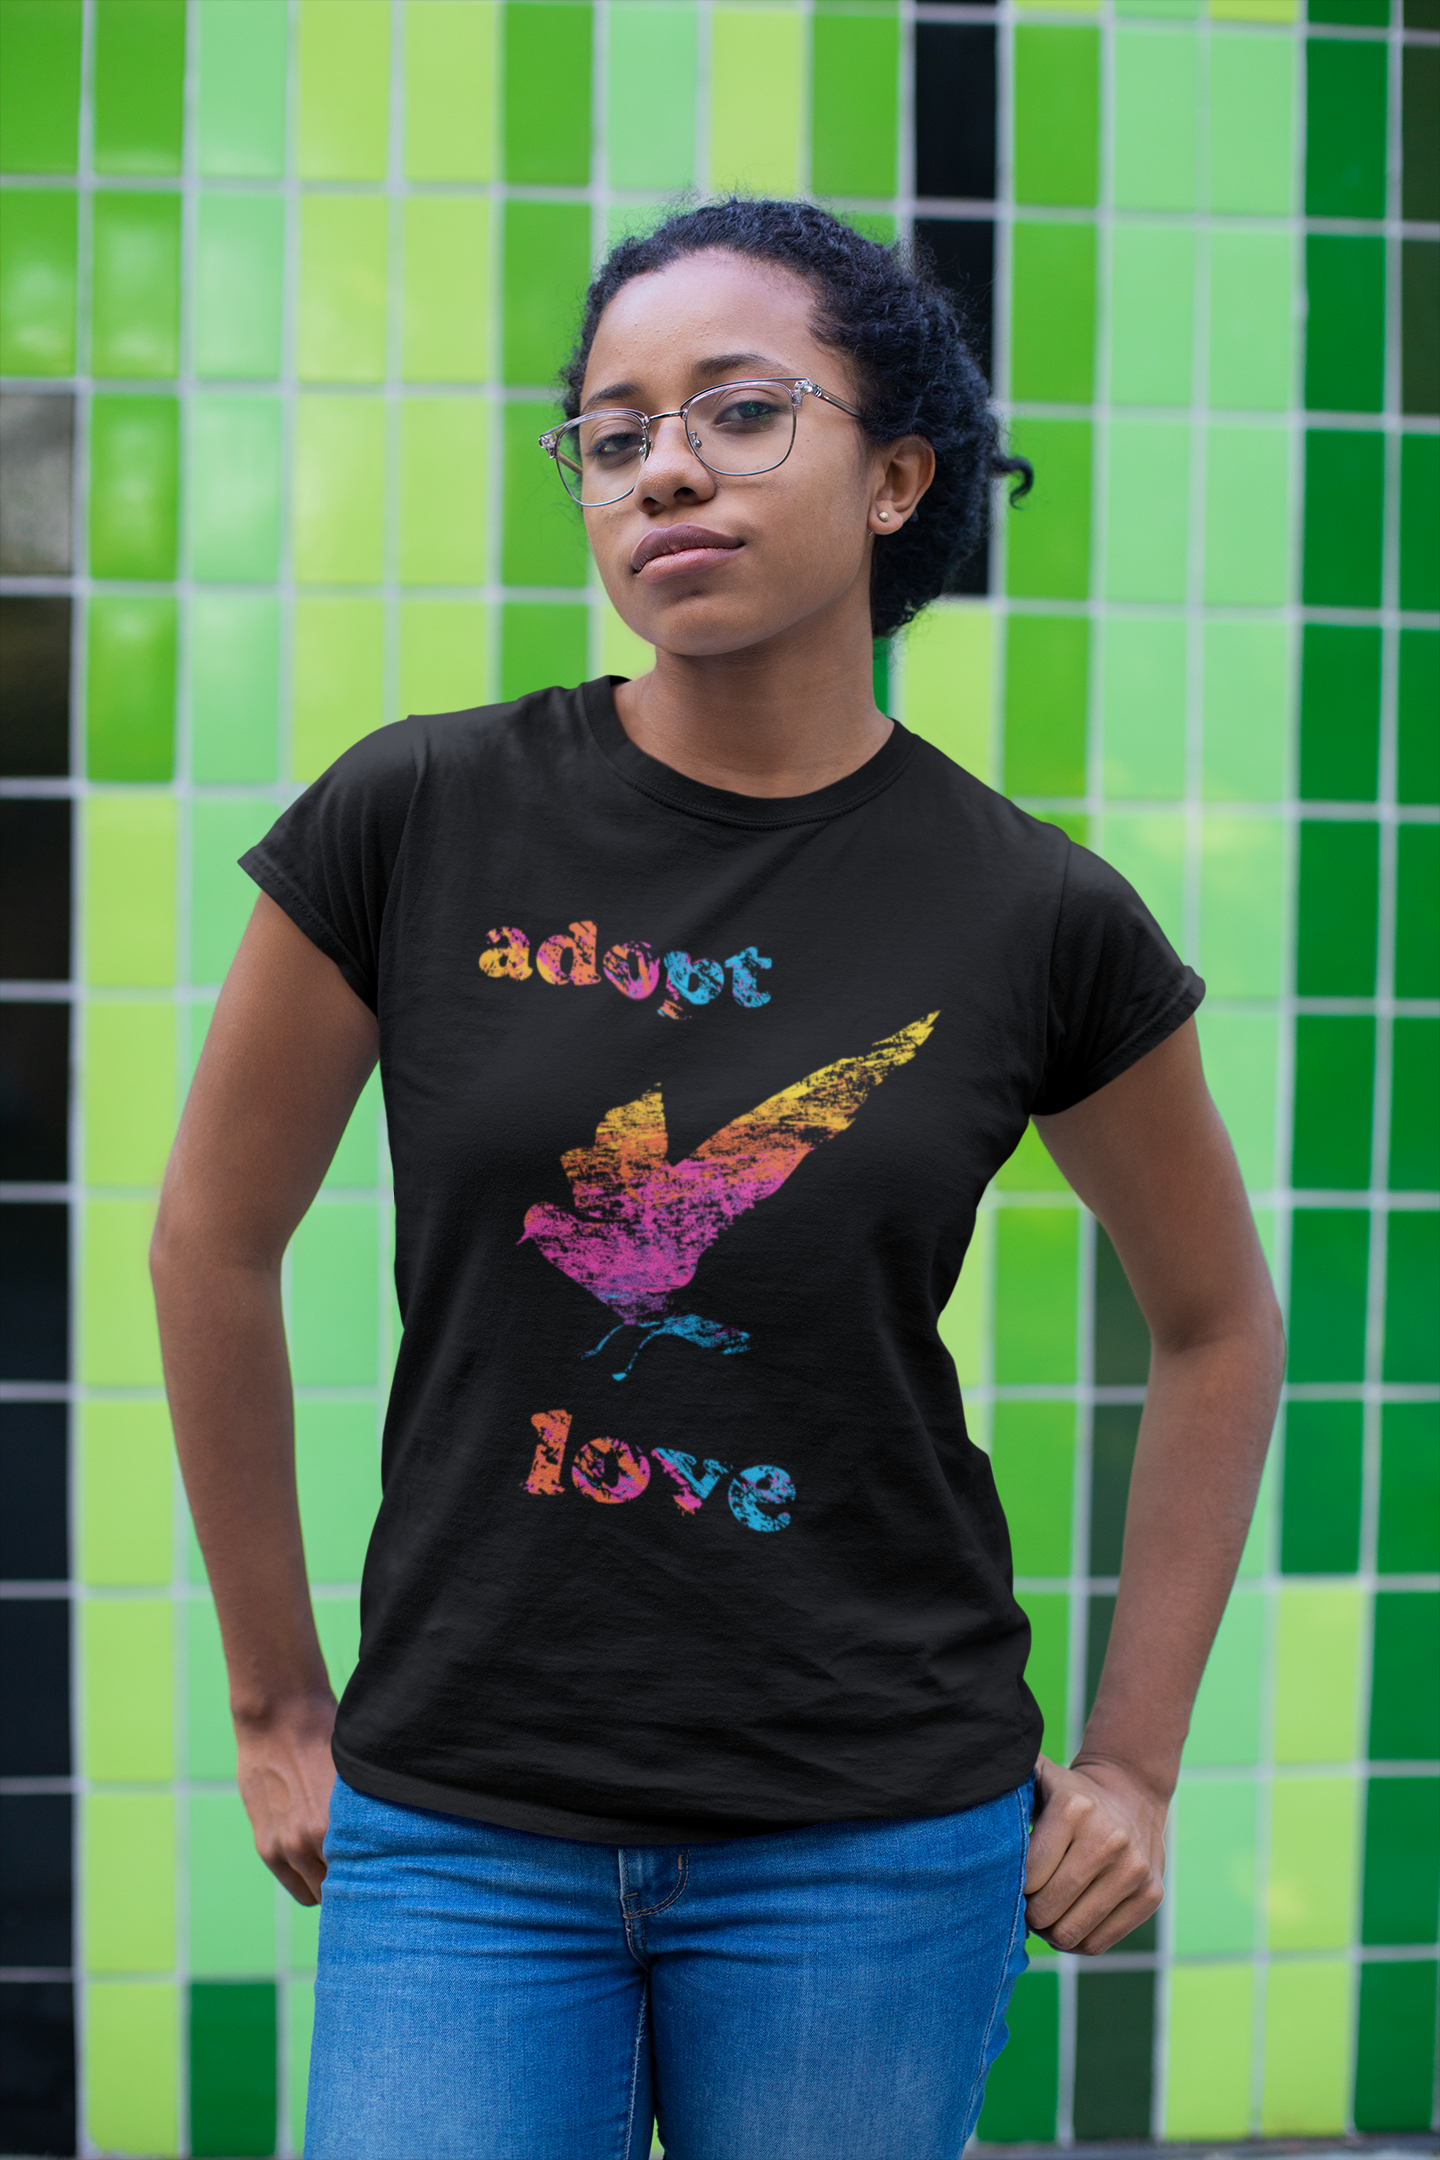 Adopt Love Bird with Colour Lettering : Unisex 100% Comfy Cotton T-Shirt, Supporting Humane Animal Shelters